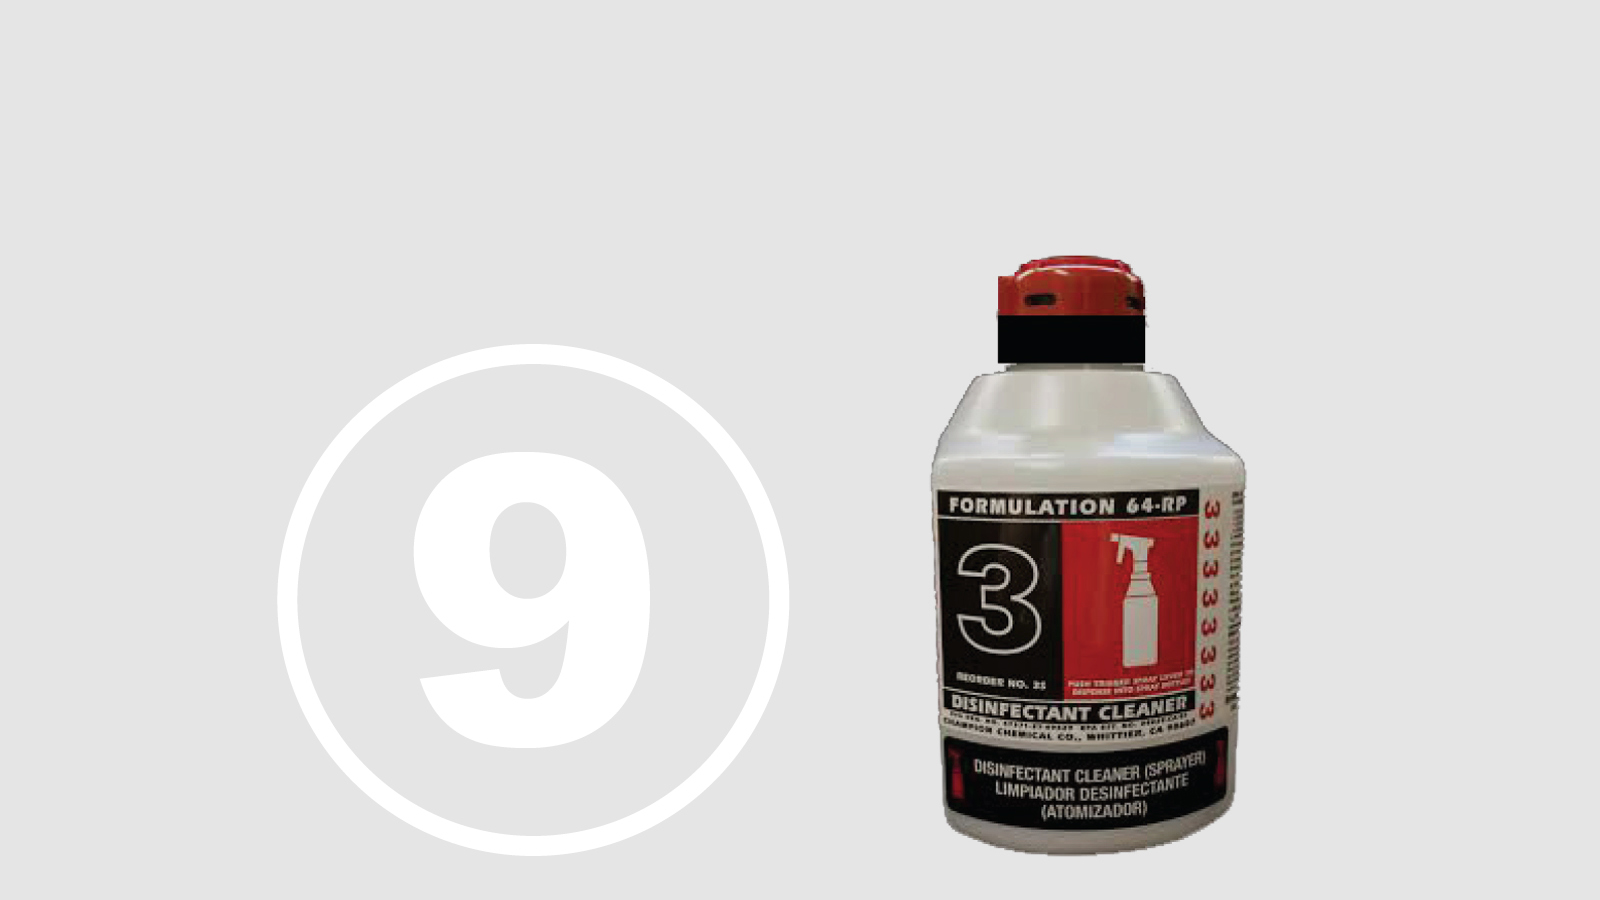 <h5>Top Ten Most Hazardous Products</h5><h4>Formulation 64-RP</h4><p>An industrial cleaner/disinfectant used by custodians, firefighters and others.<br />We found <span class=